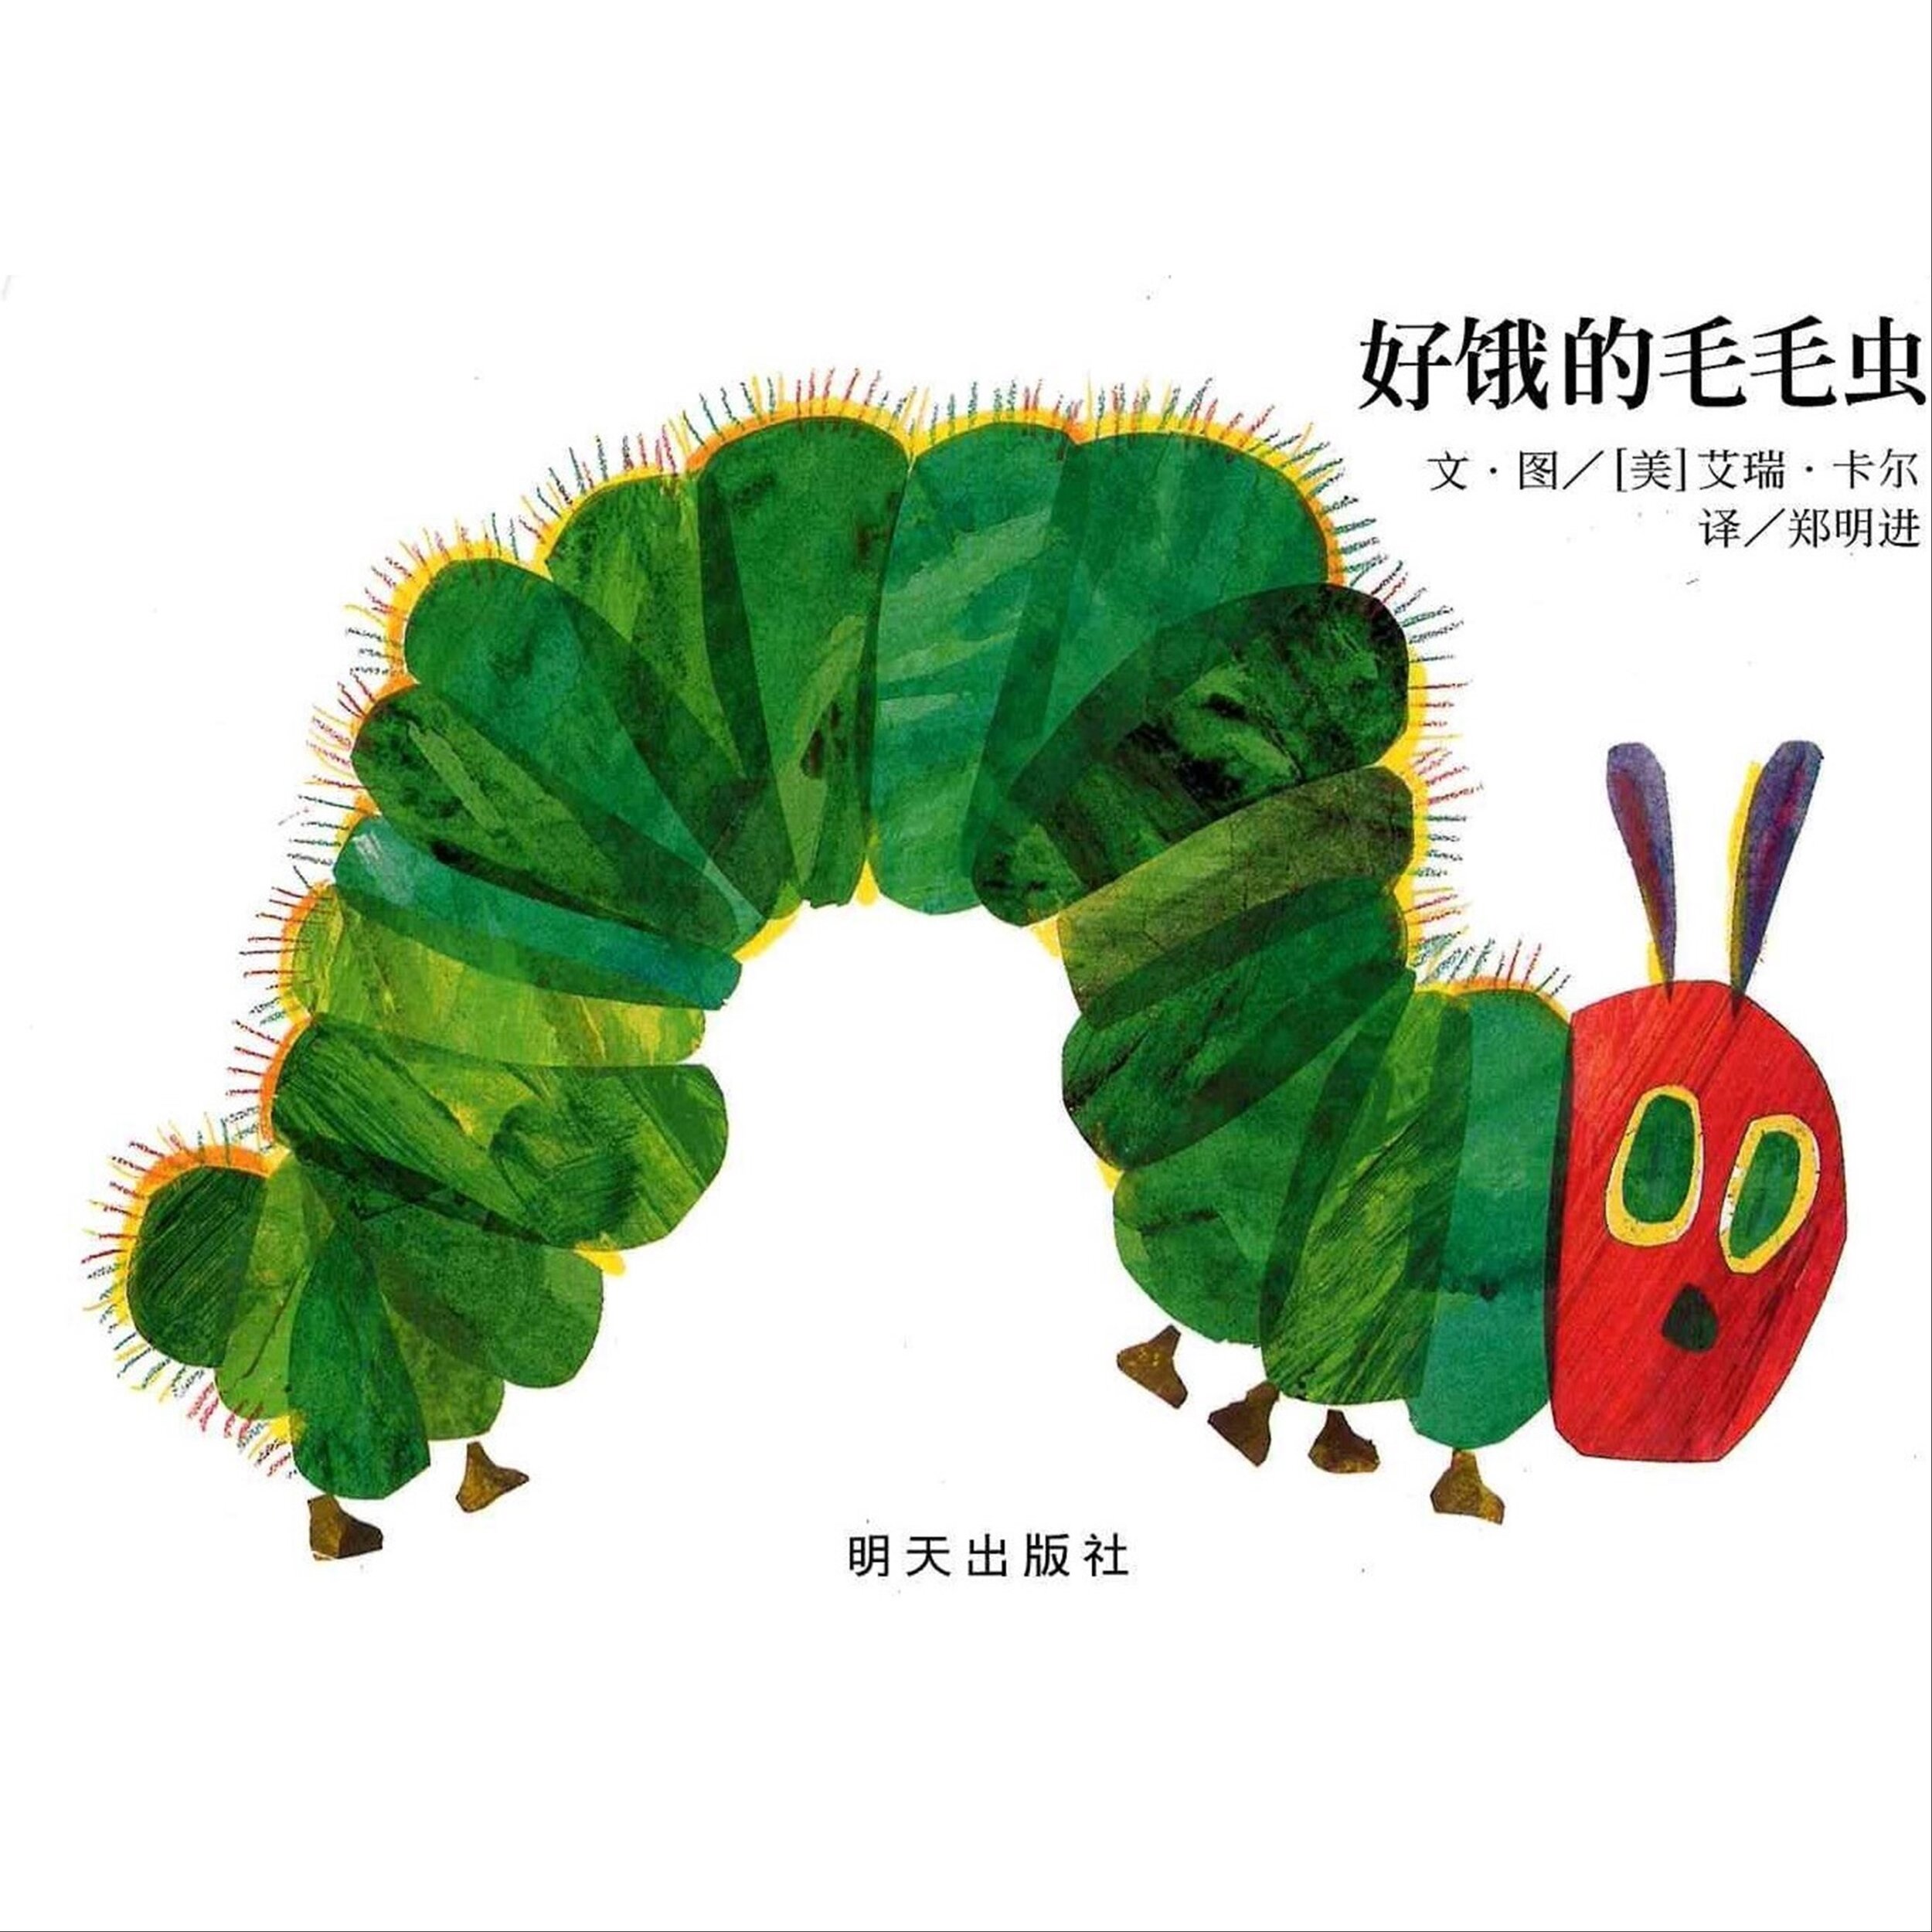 The Very Hungry Caterpillar Simplified Chinese Translation